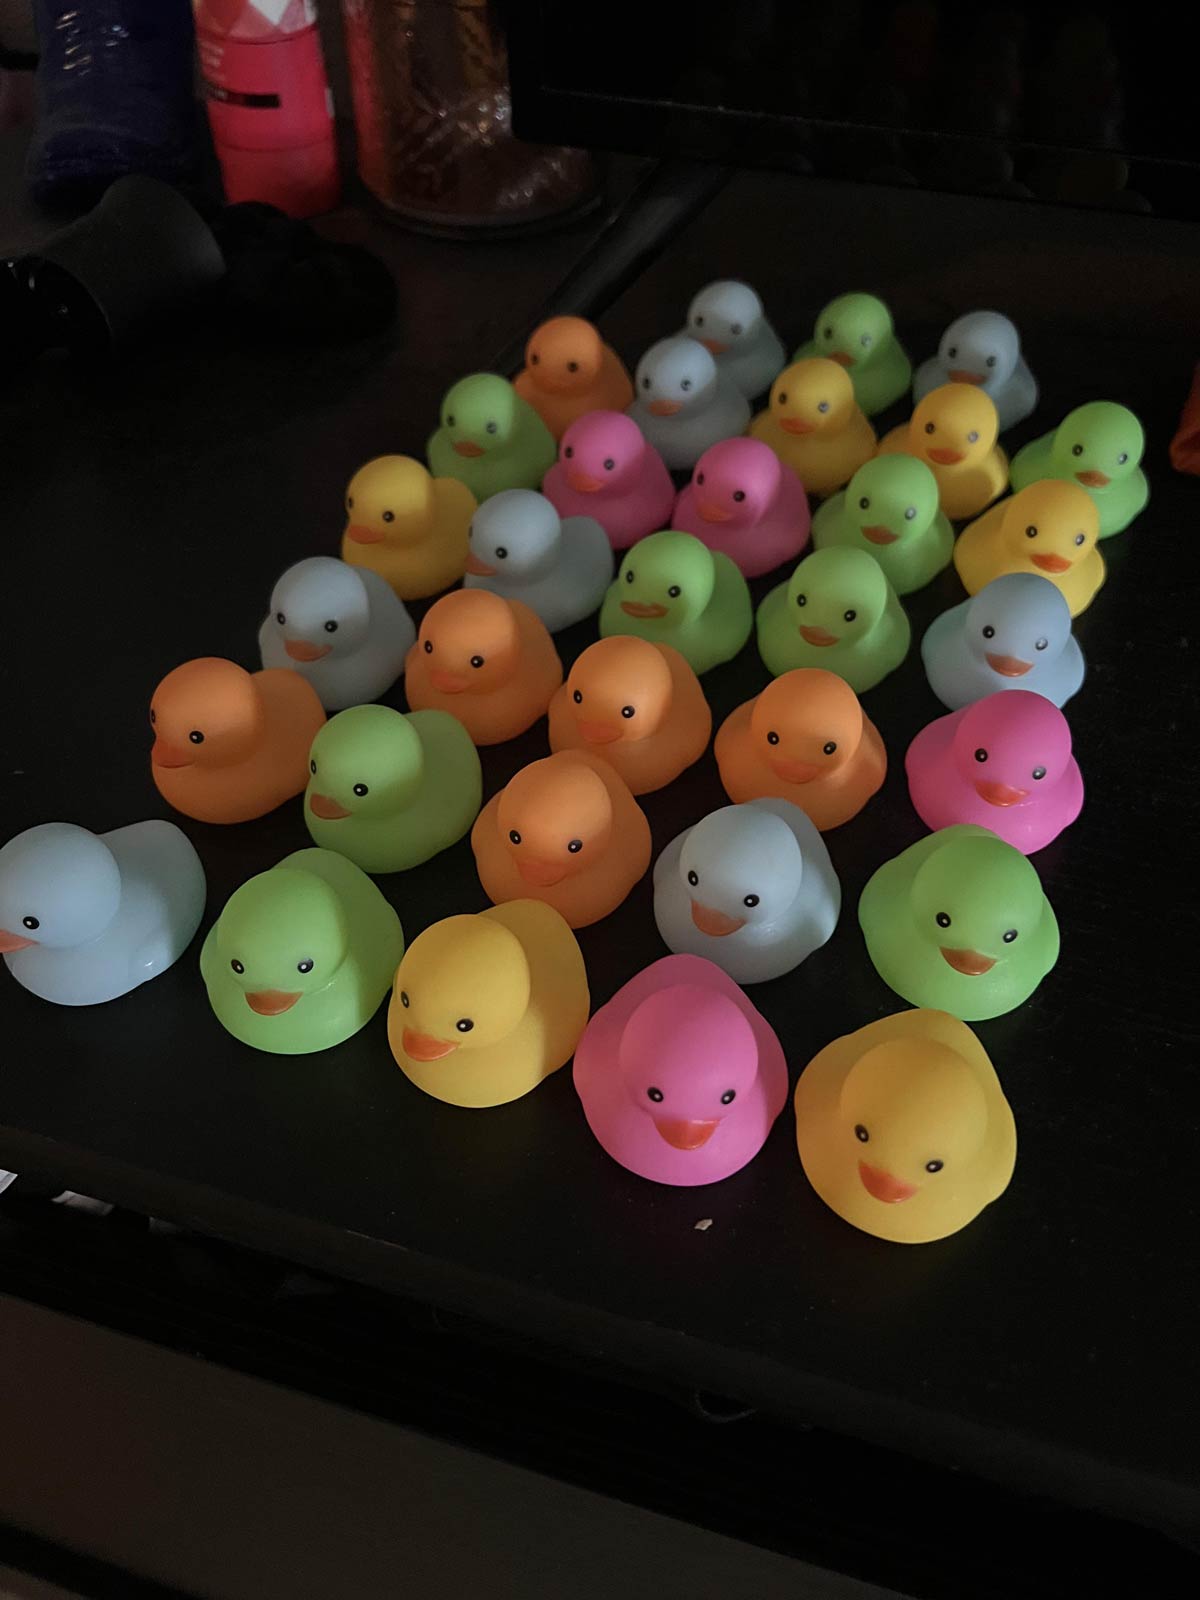 I hid 100 rubber ducks while my wife was asleep. As of 8 this morning, she has found about a third of them